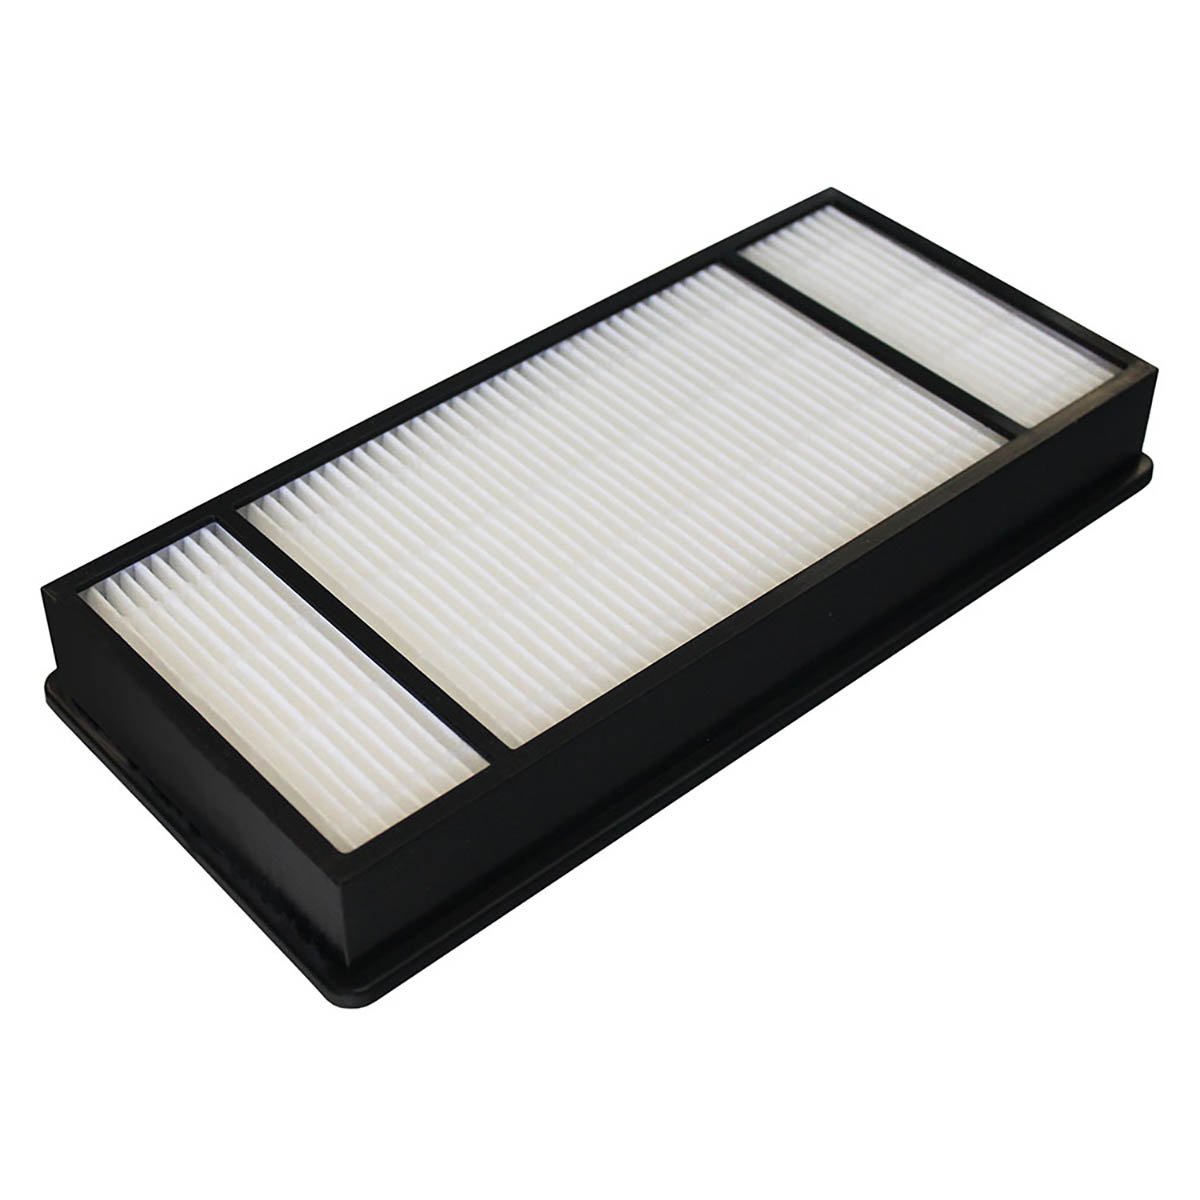 Harloff Scope Cabinet Replacement HEPA Filter - Pack of 1